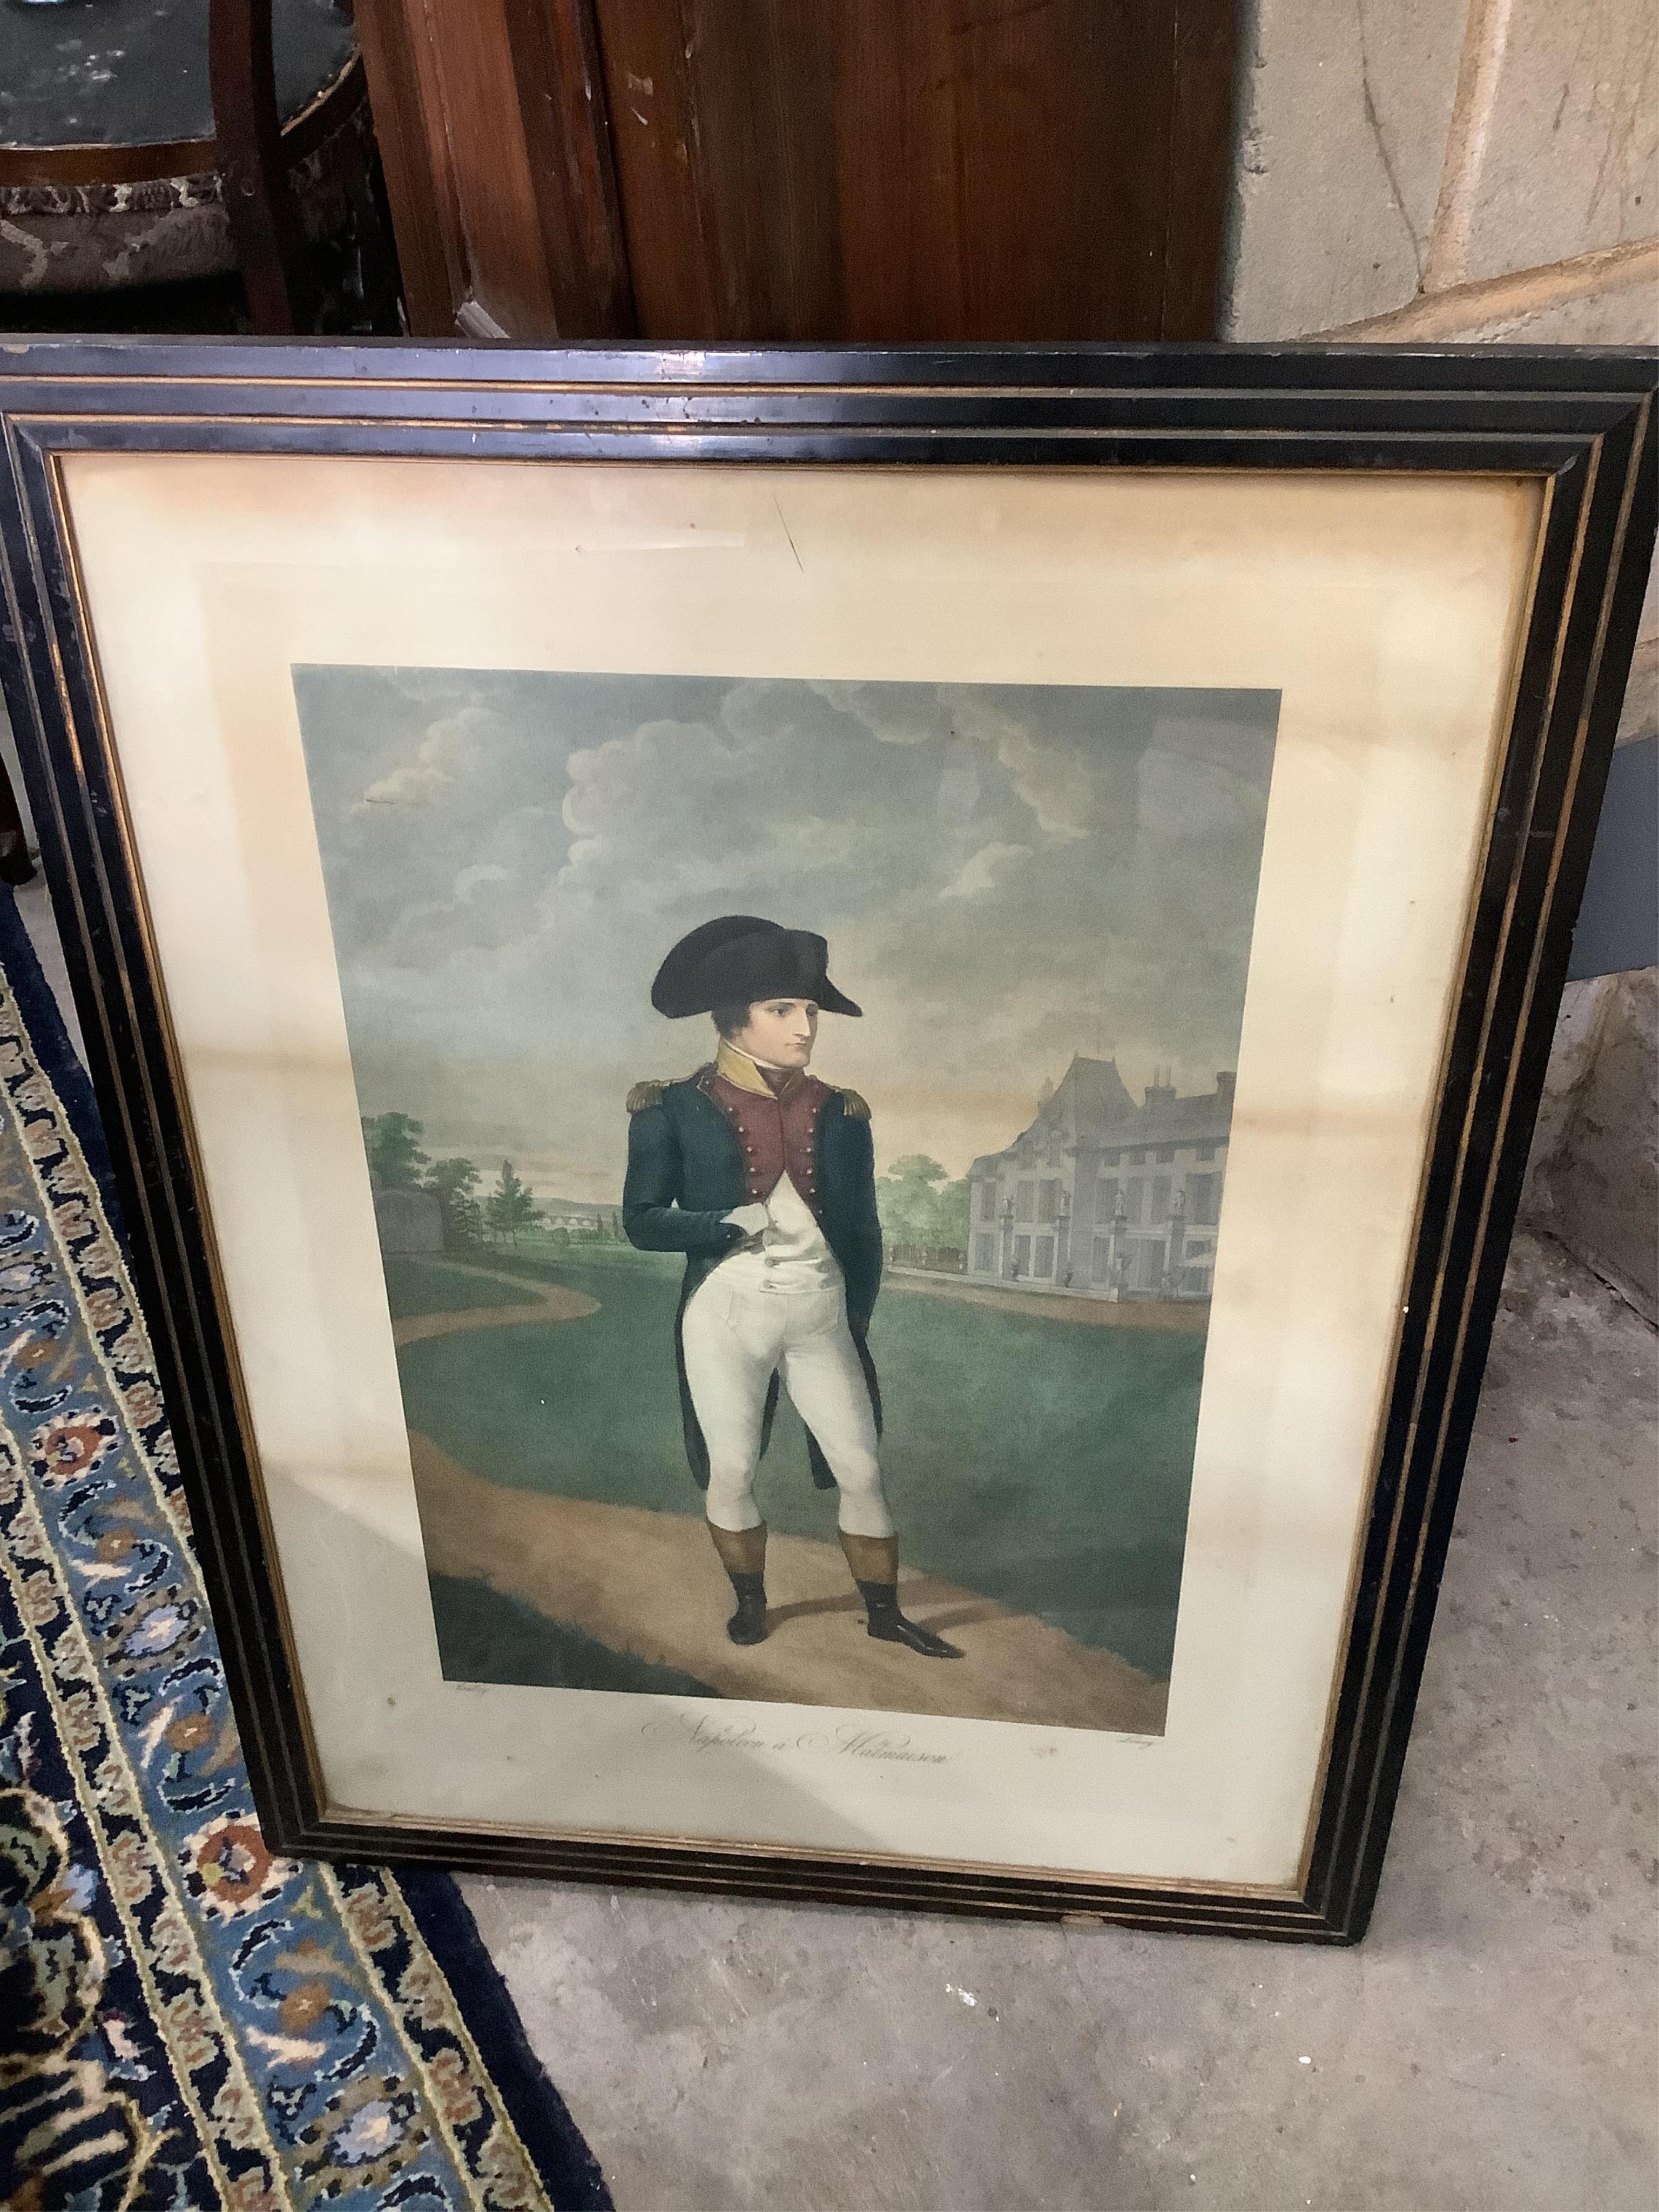 Large collection of 19th century and later prints including ‘Napoleon Bonaparte in his domestic retreat at Malmaison’, colour engraving and views of the Isle of Wight, etc.